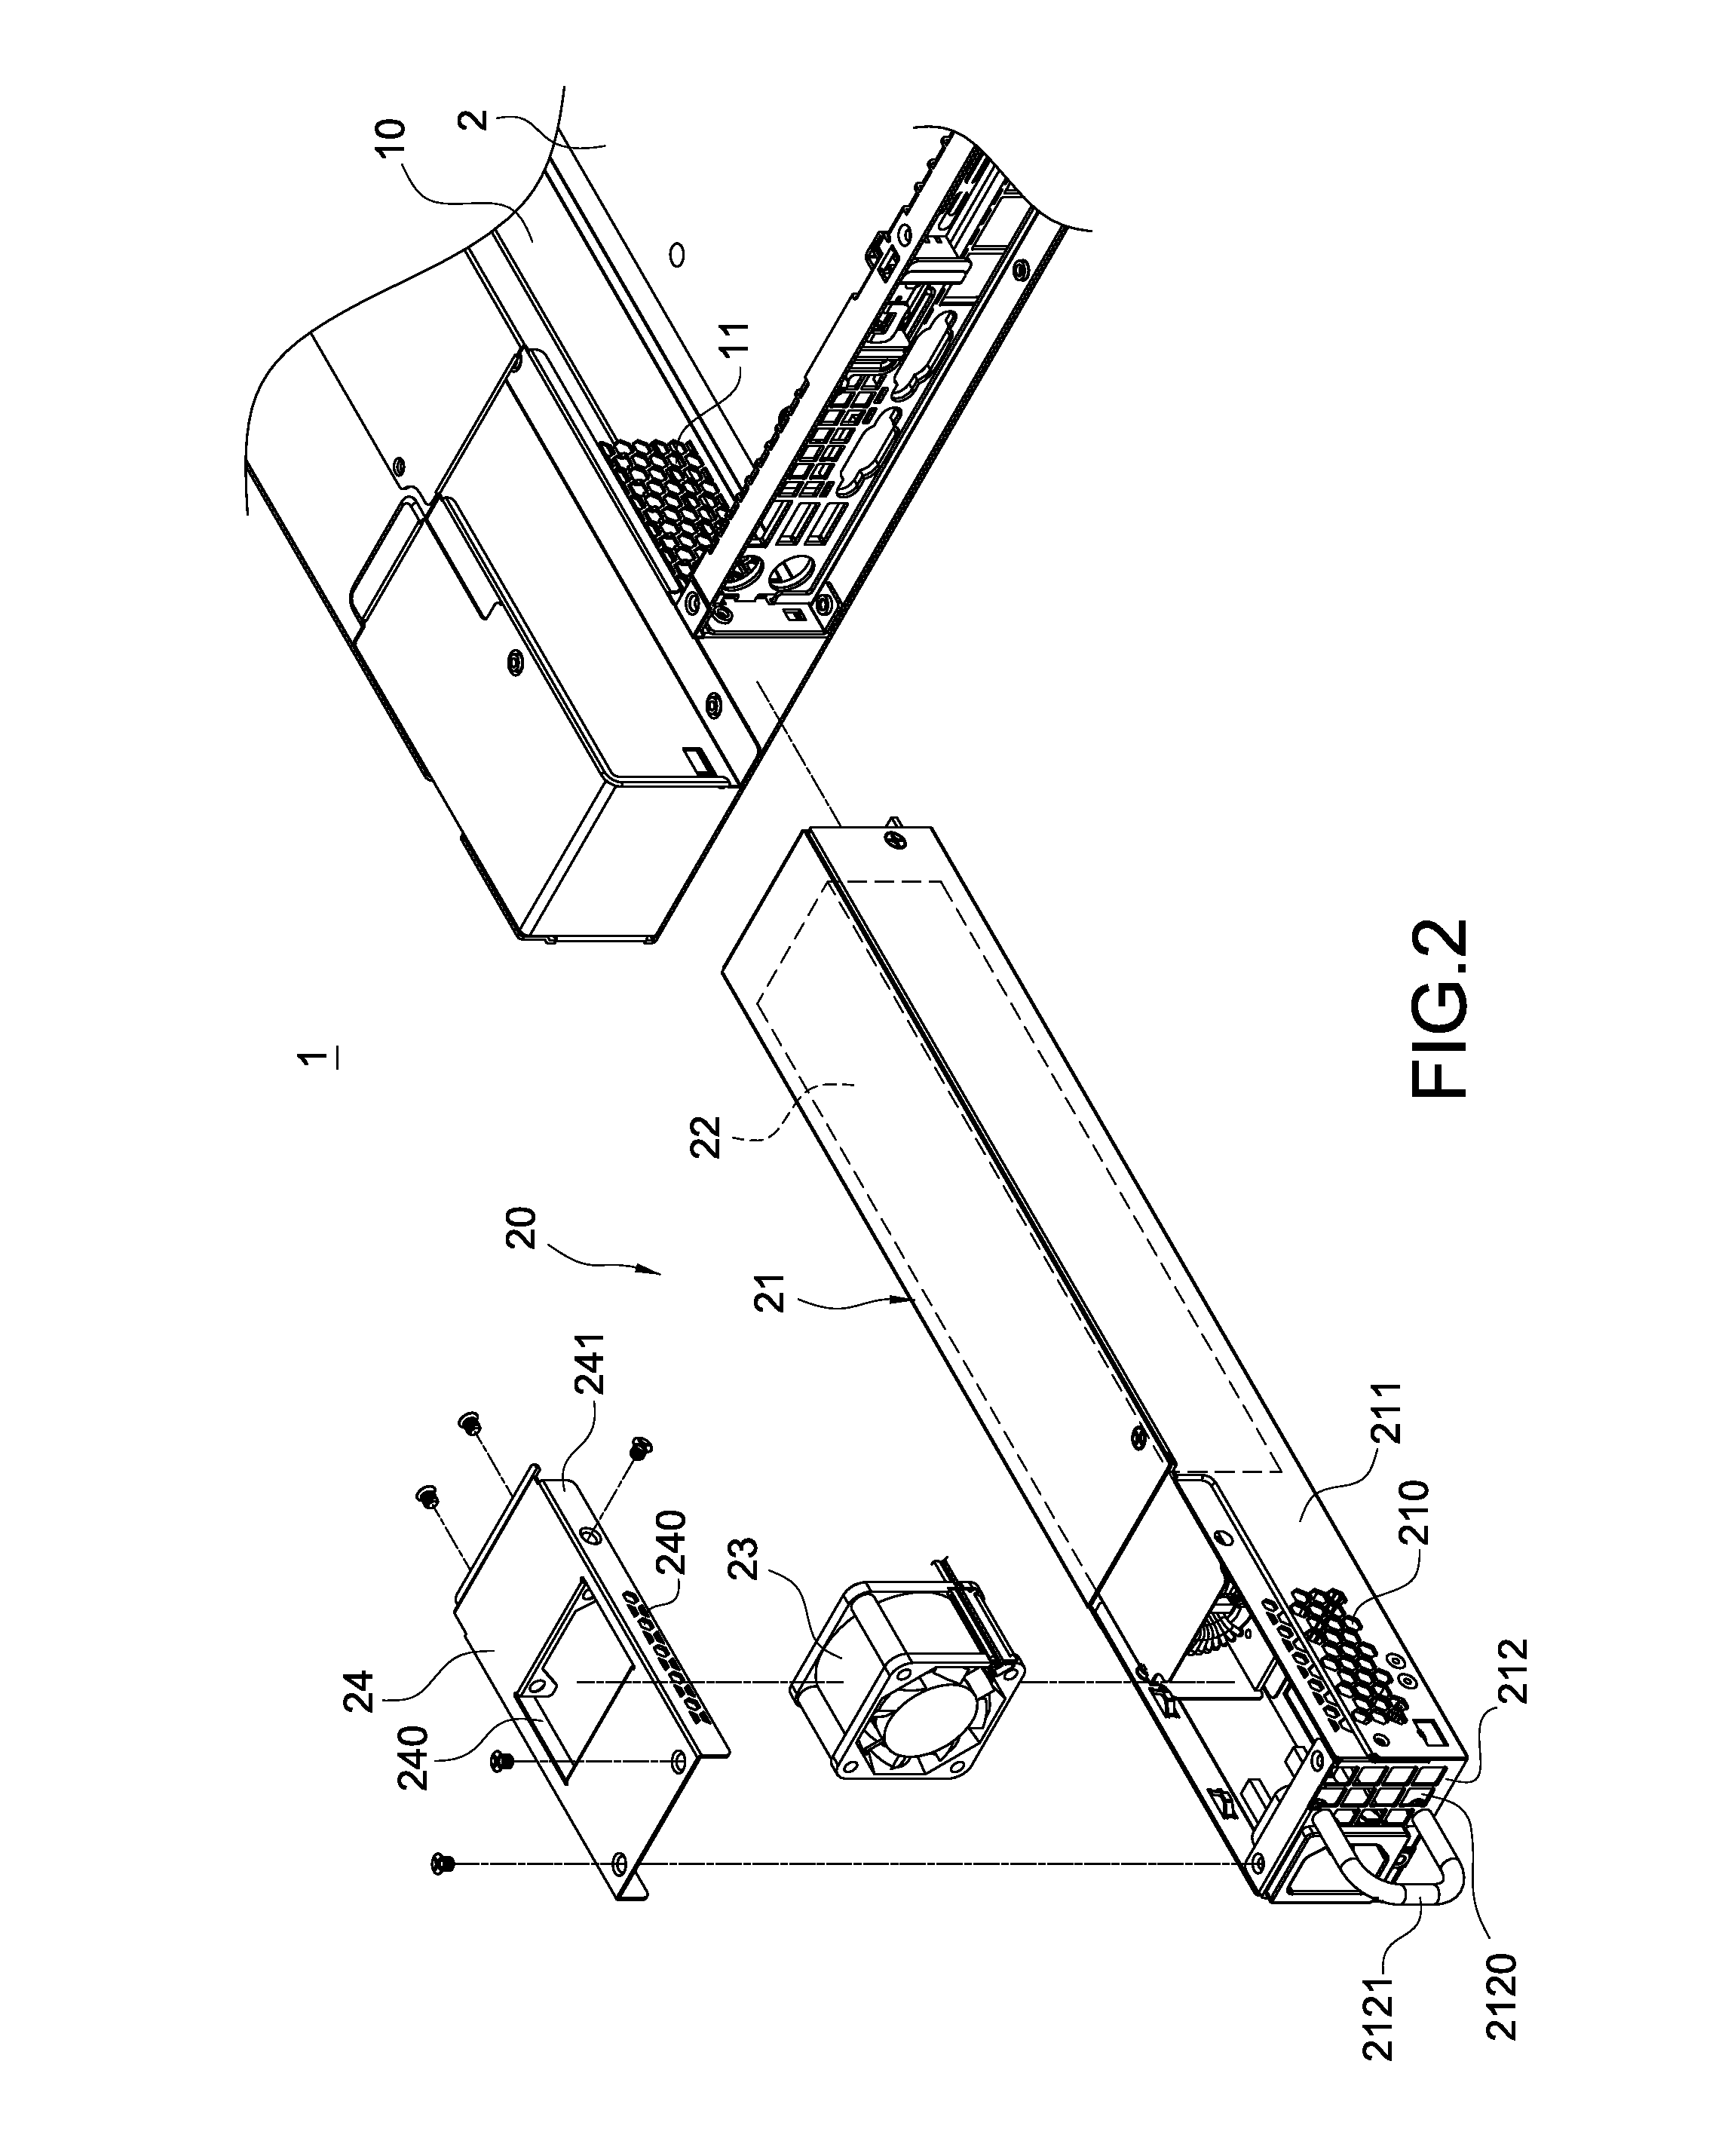 Heat-dissipating assembly for server